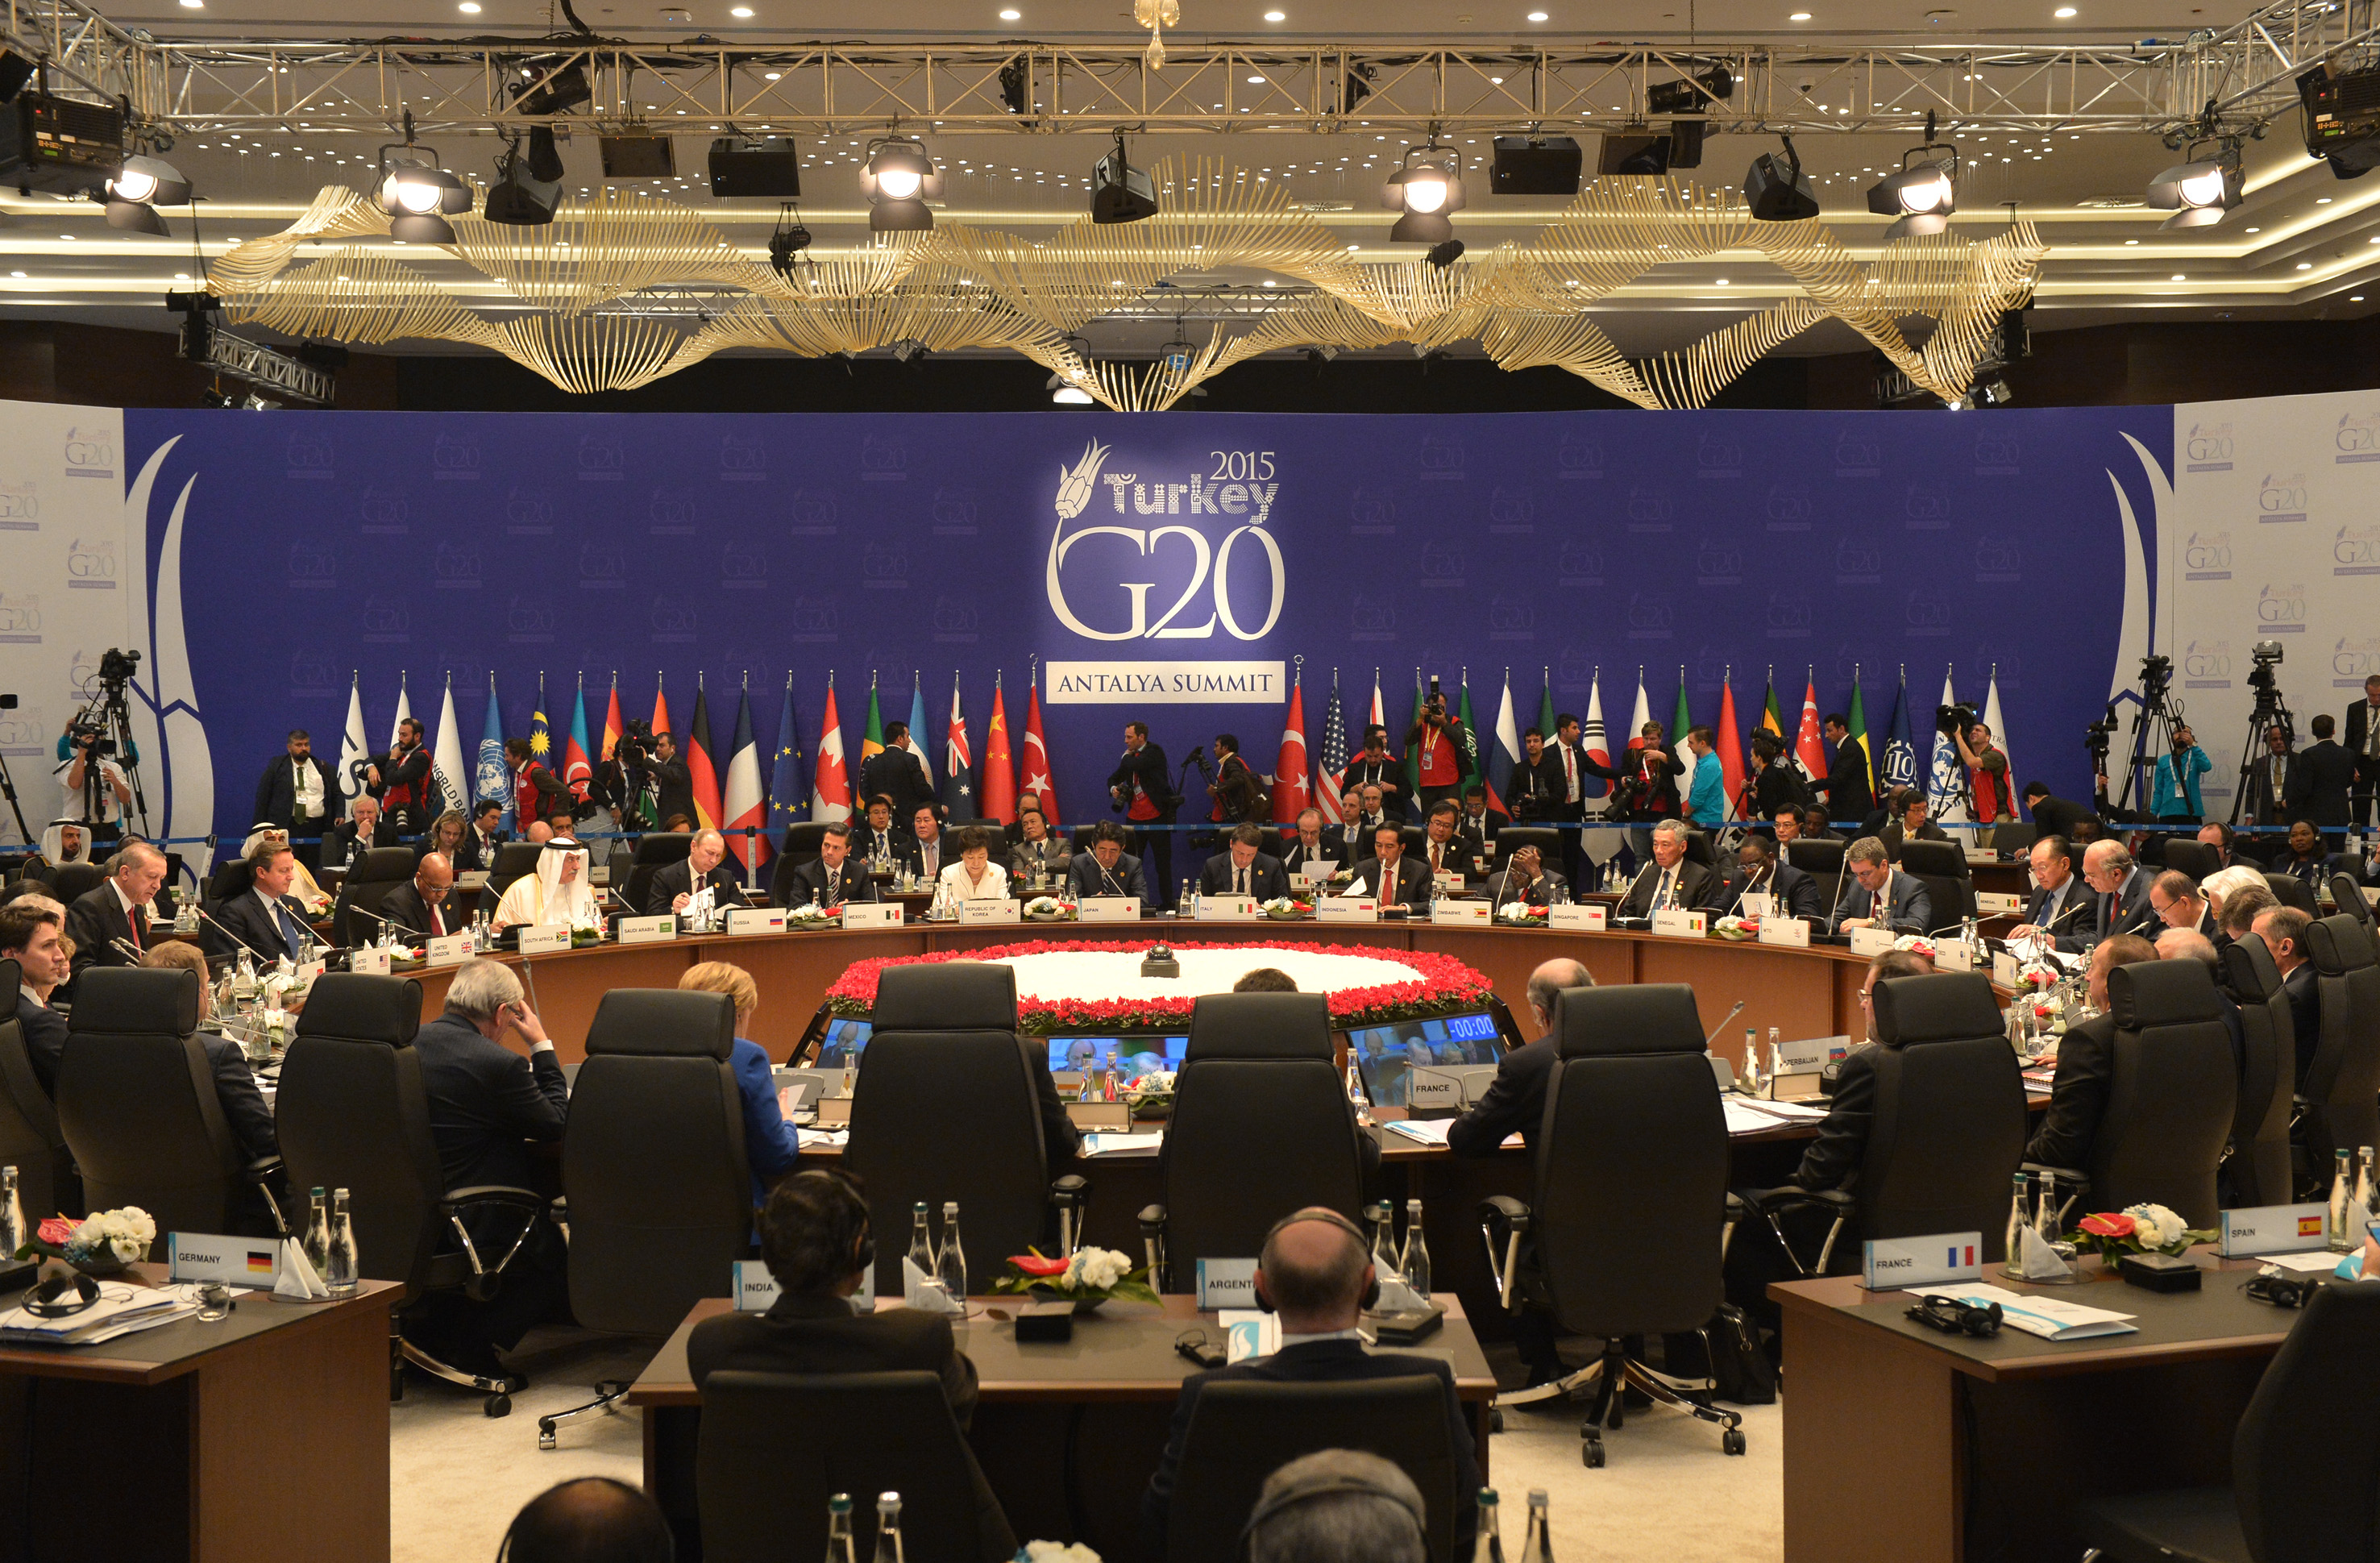 Prime Minister Lee Hsien Loong at the G20 Summit in November 2015 in Antalya Turkey (ST Photo © Singapore Press Holdings Limited. Reproduced with permission)